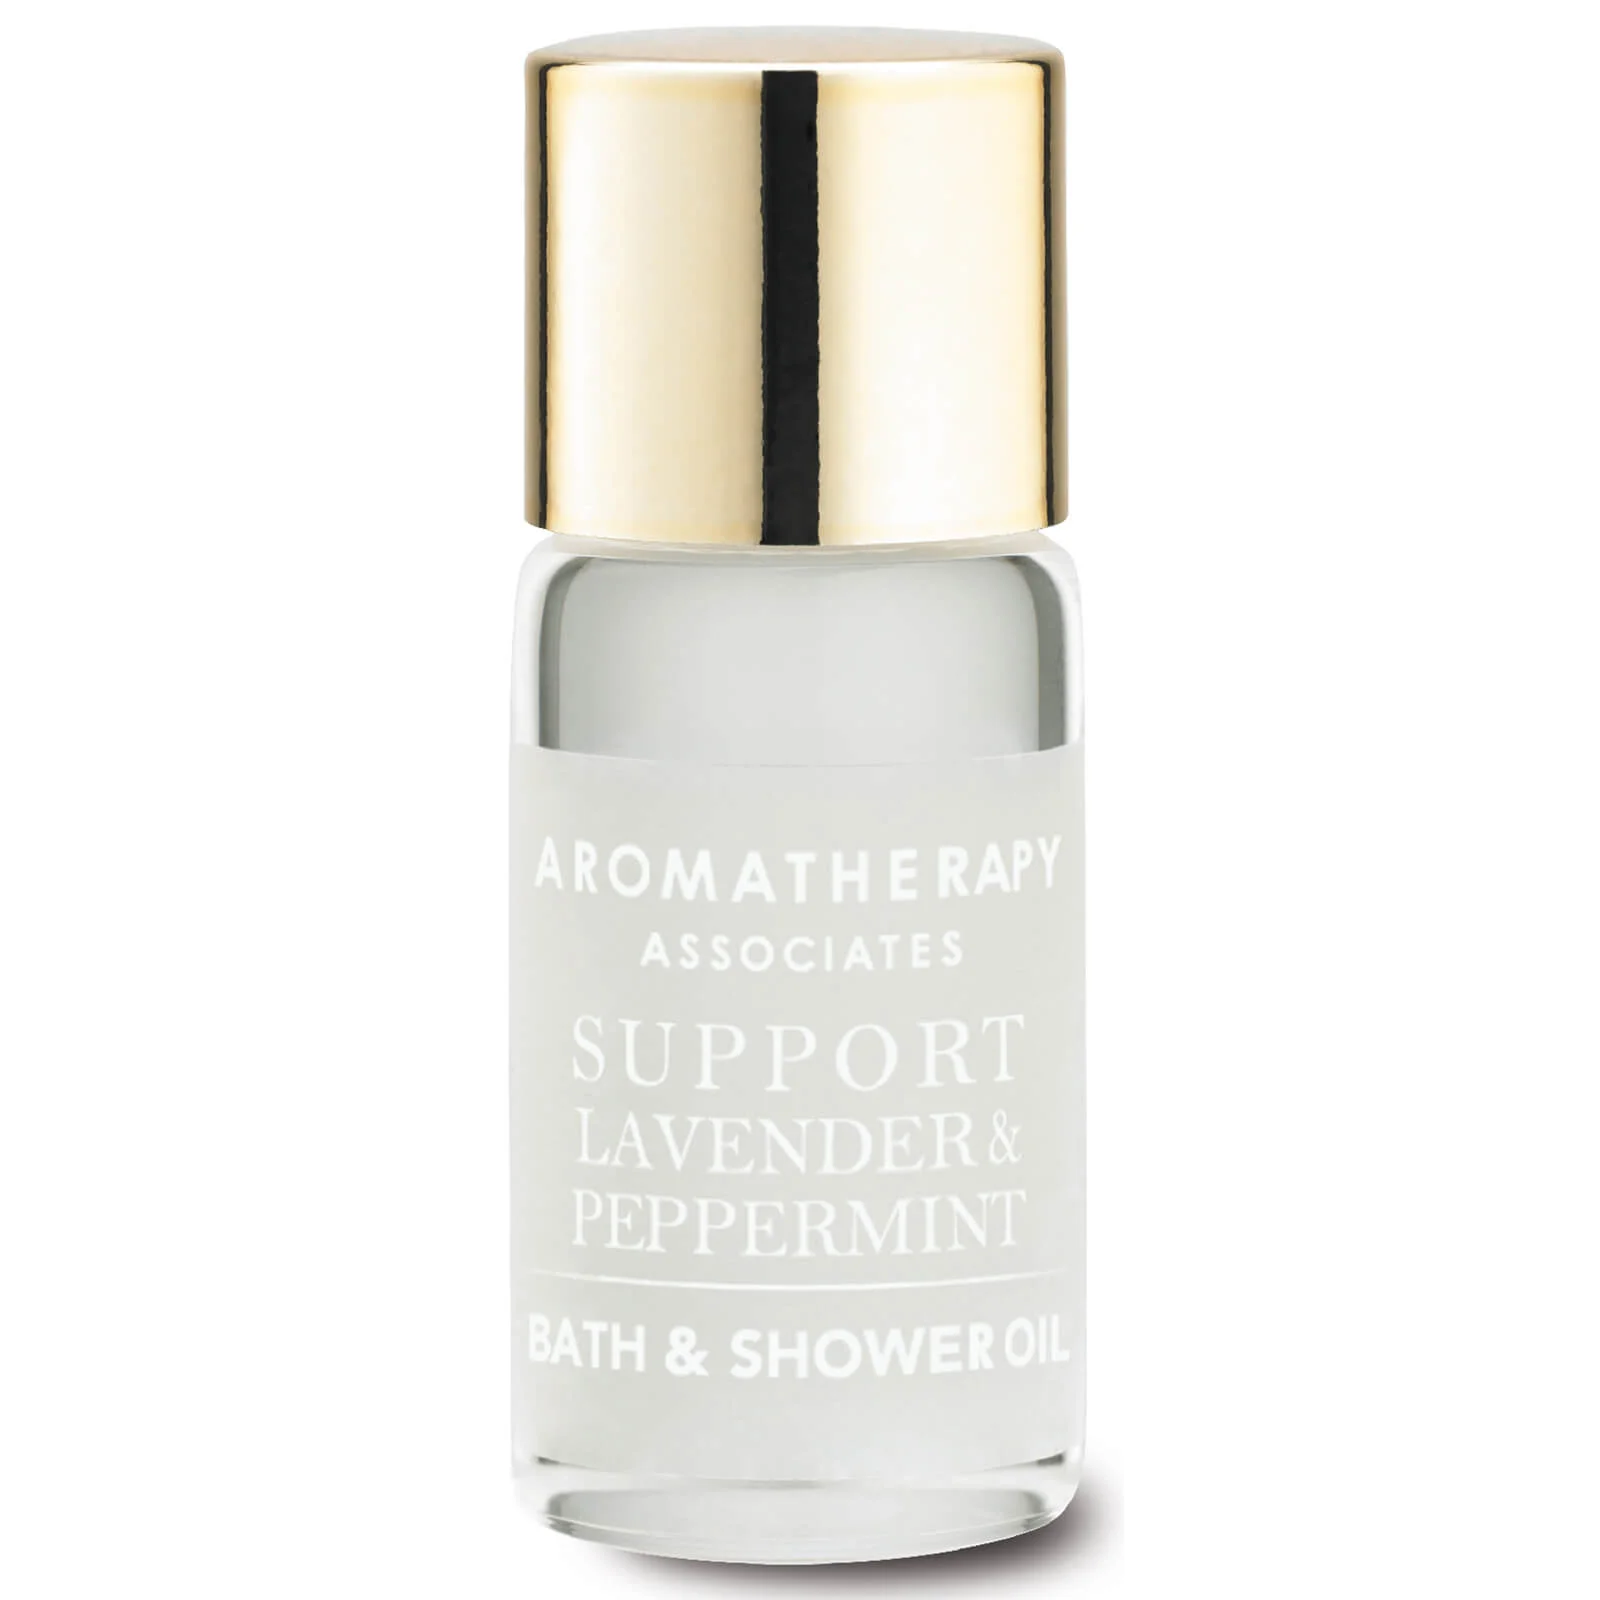 Aromatherapy Associates Support Lavender & Peppermint Bath & Shower Oil 3ml Image 1